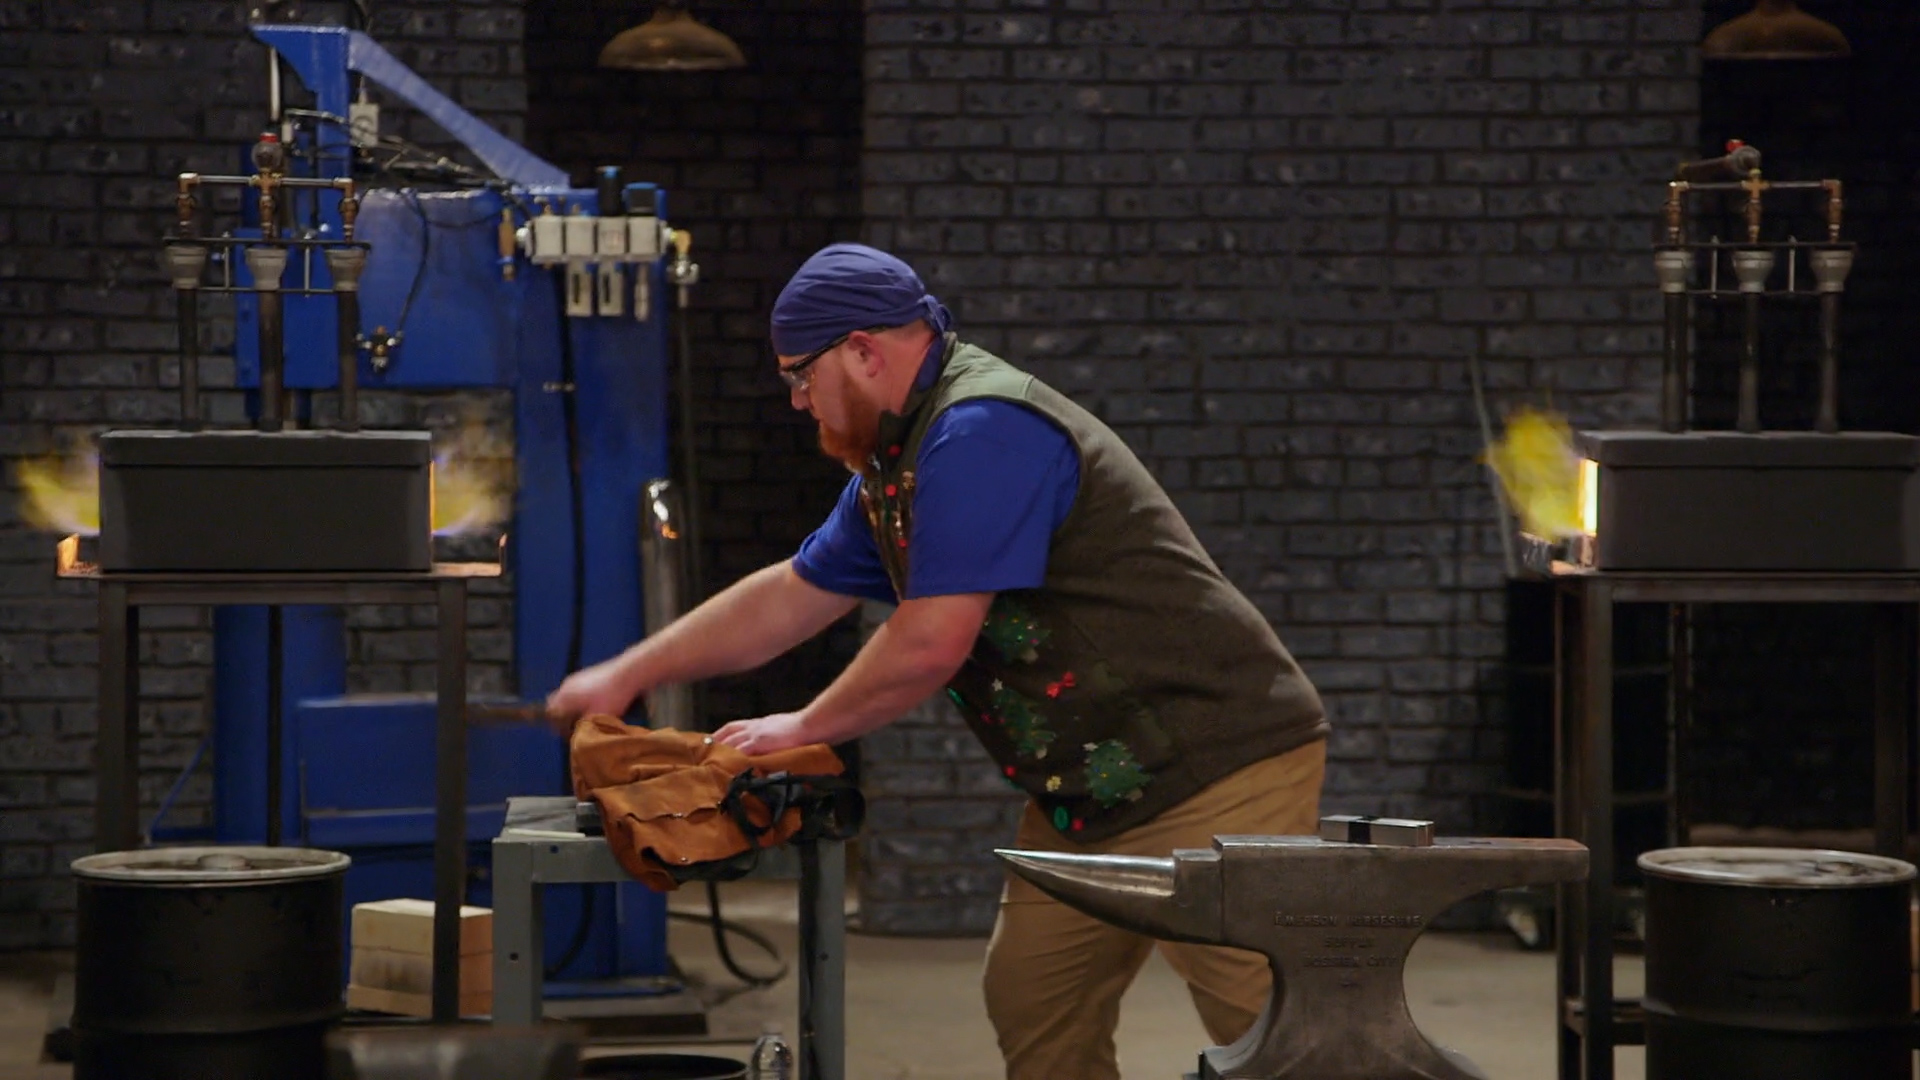 forged in fire season 6 torrent